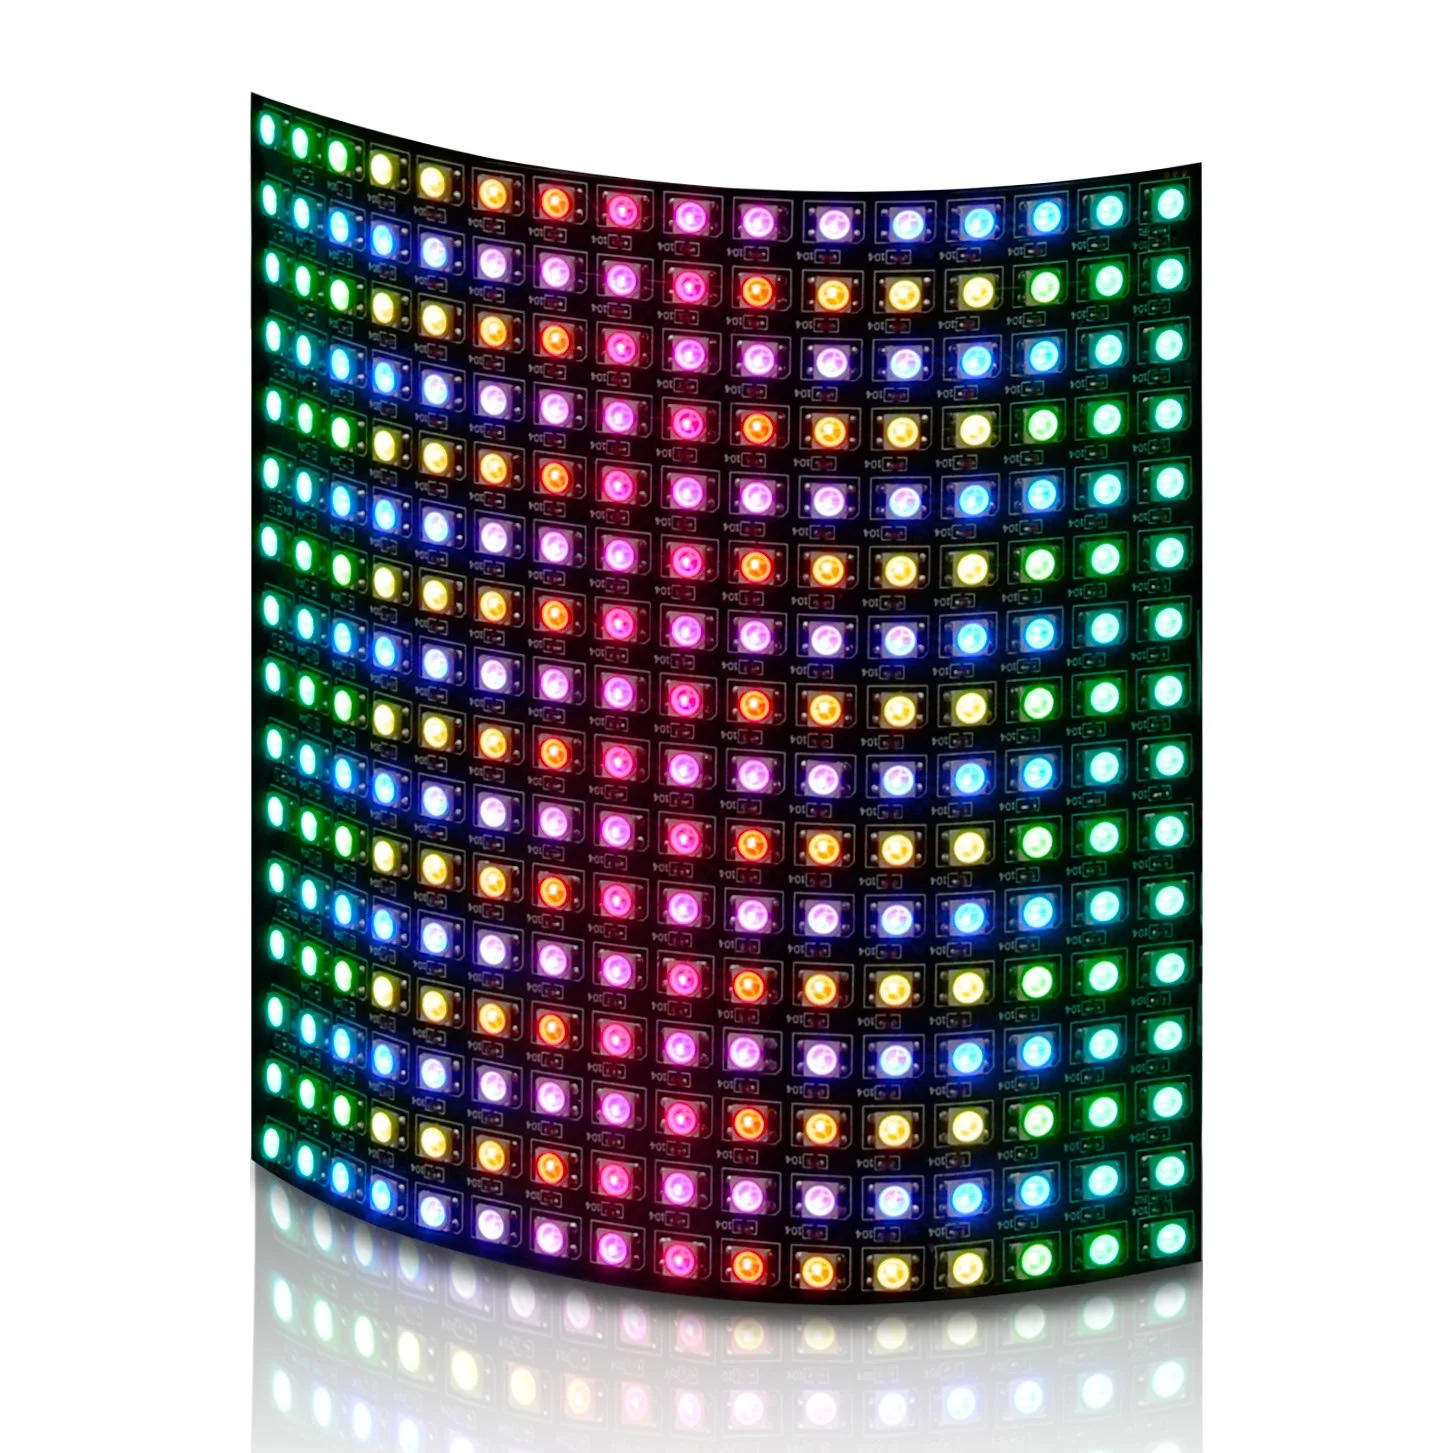 Wholesale Full Color RGB Programmable LED Matrix Panel 16x16 256 LED Display Works with pi or Arduino From